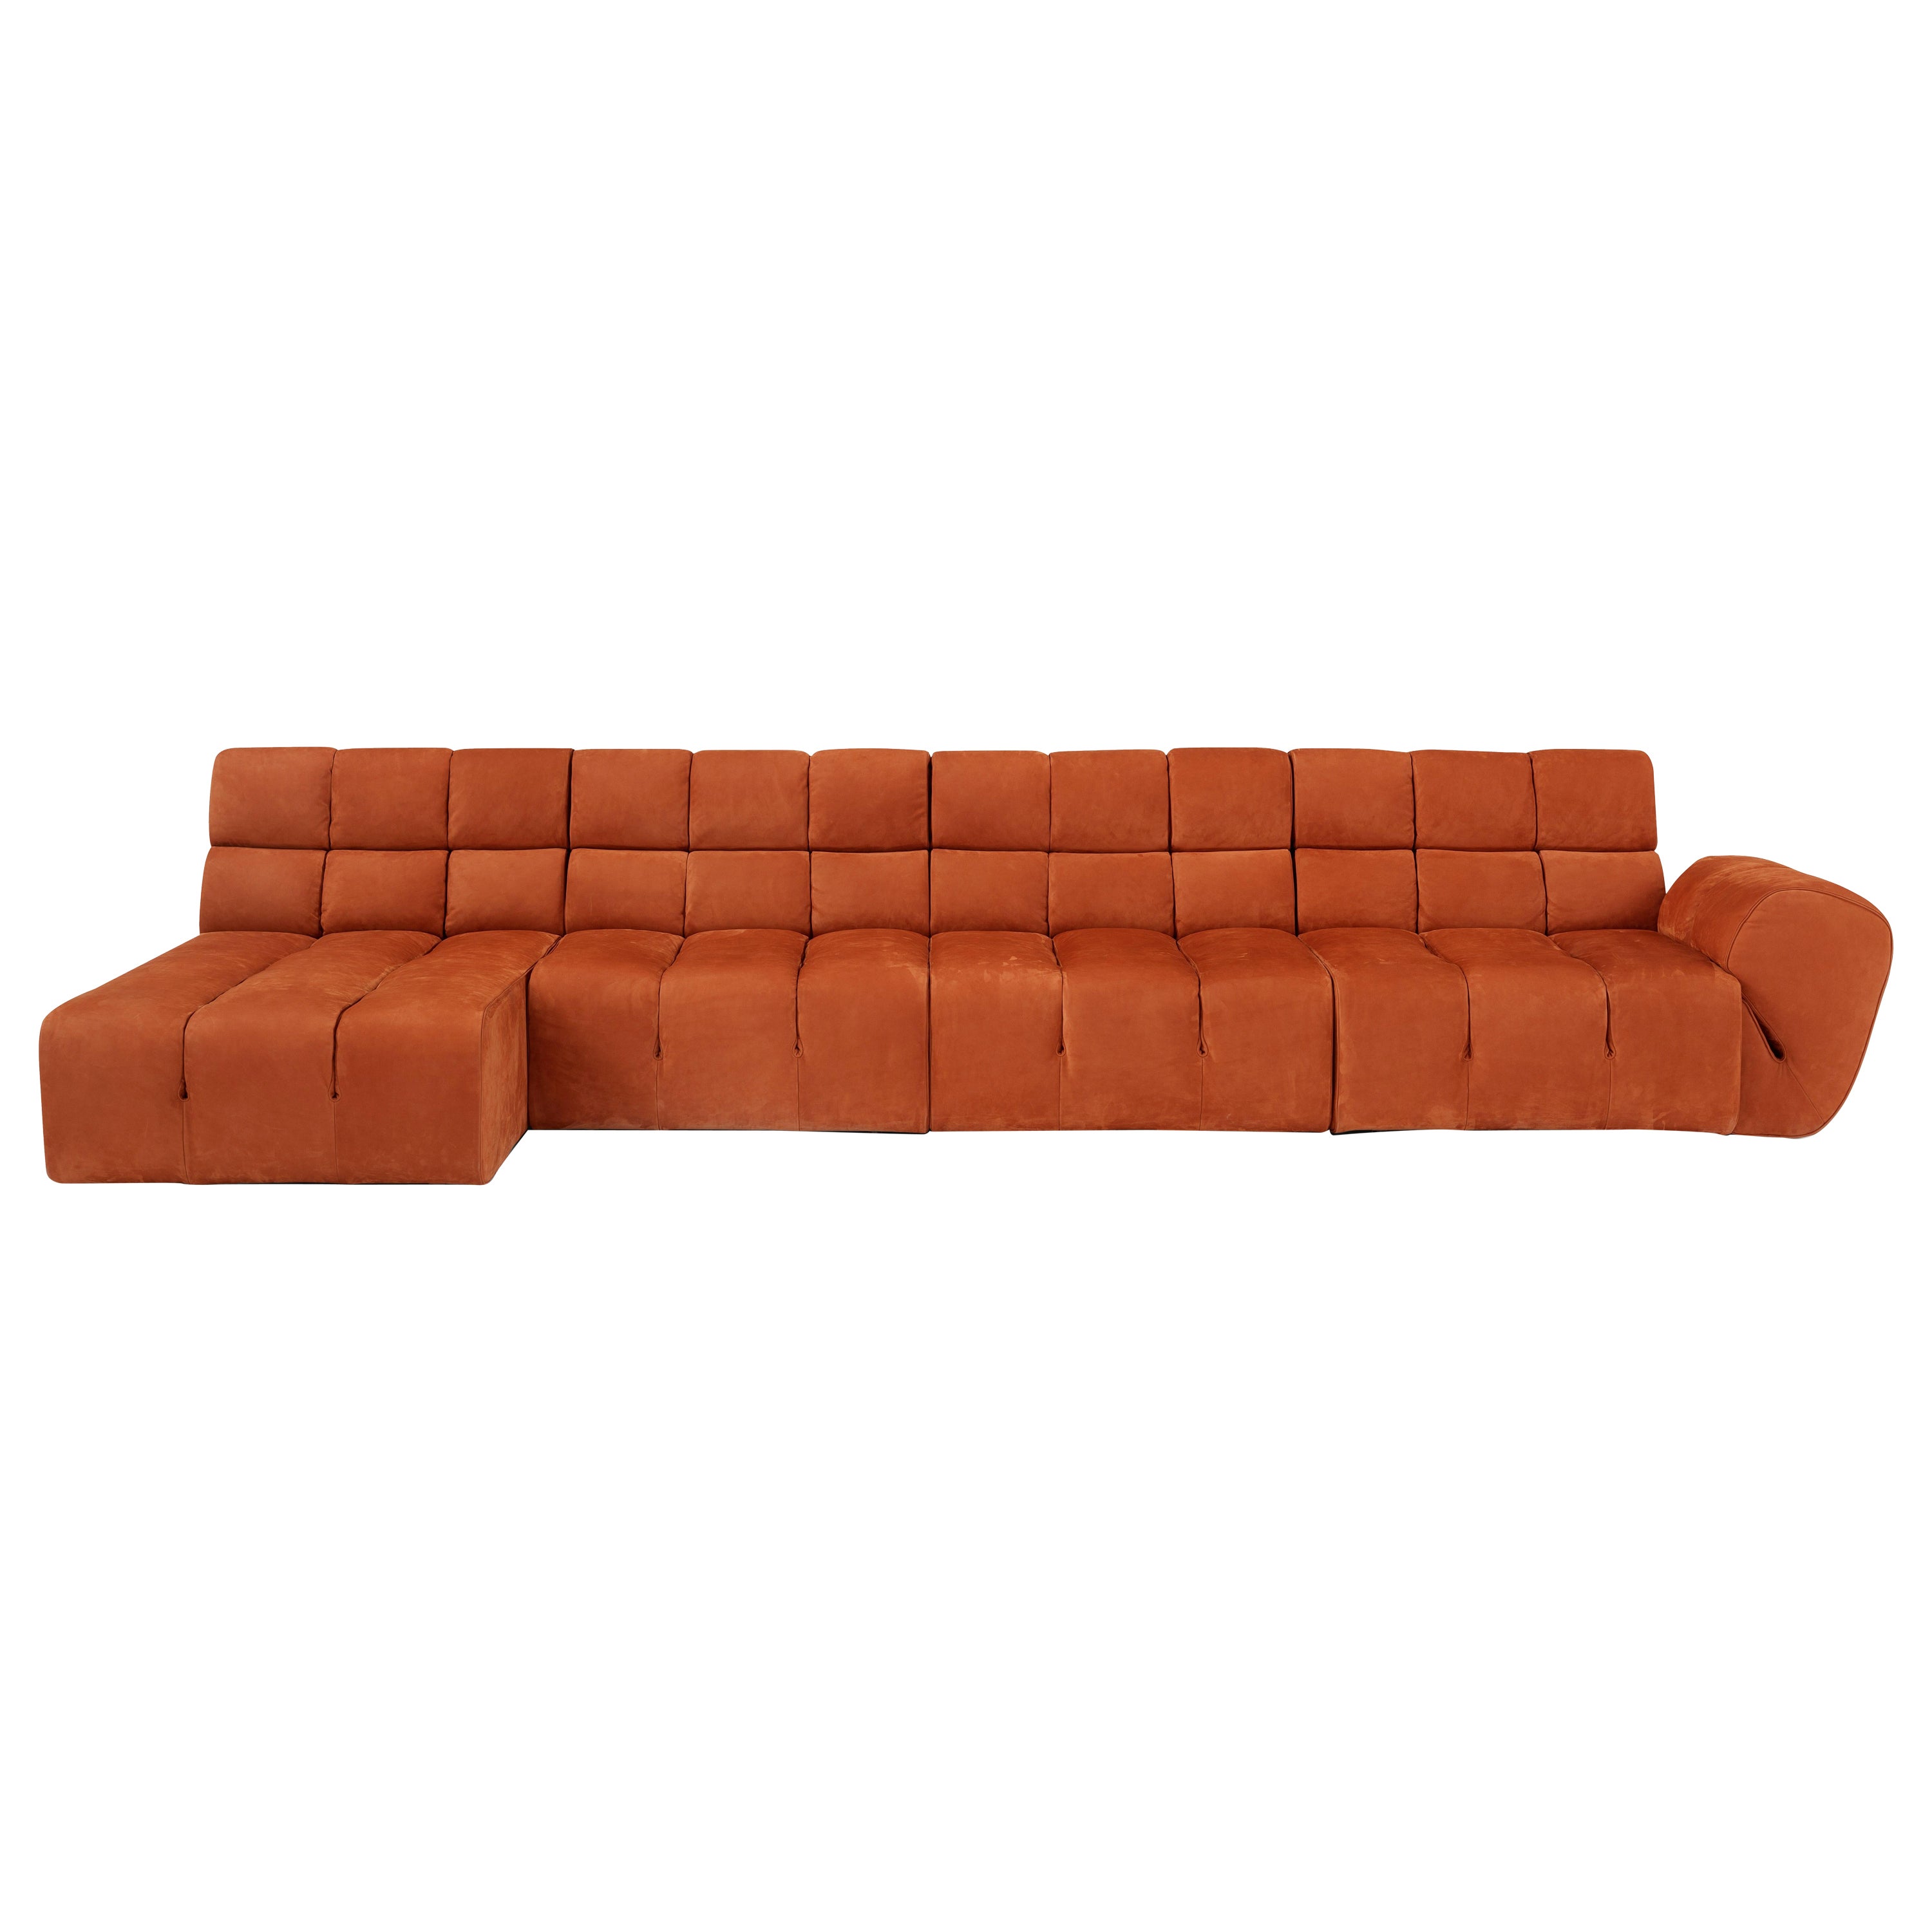 Contemporary Orange Sofa 'Palmo' by Amura Lab, Leather Nabuck 19 For Sale